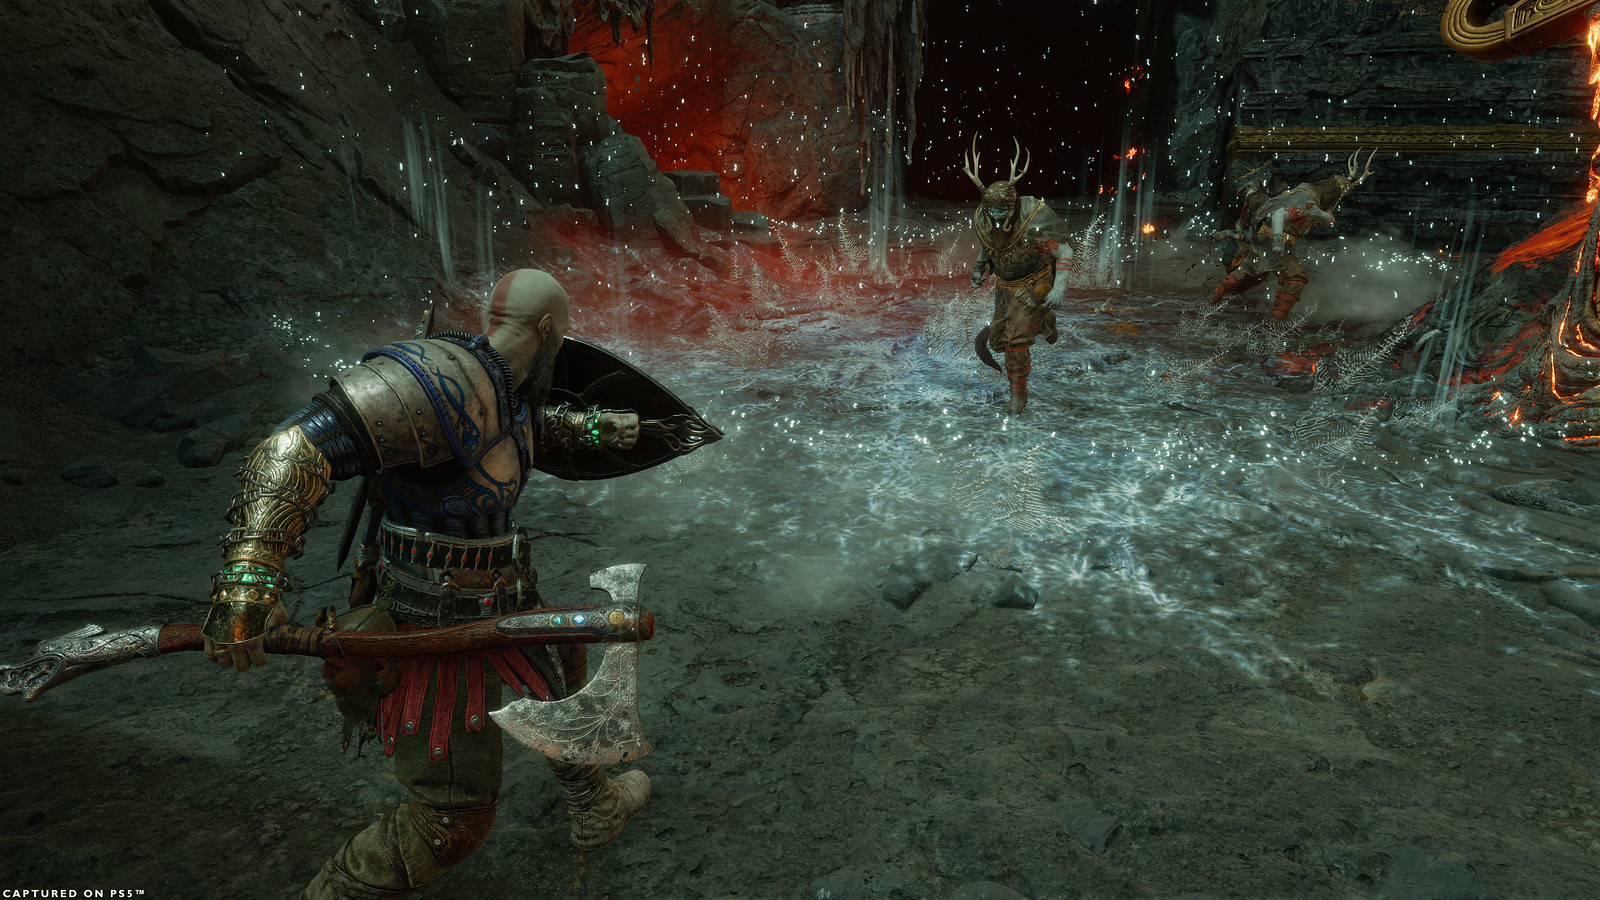 Kratos faces off against Hel-Raiders in the Muspelheim Arena. The ground is covered in a large frost effect from Kratos’ Runic Summon ability. Kratos has his shield raised against his enemies, holding the Leviathan Axe in his right hand as he prepares for their approach.